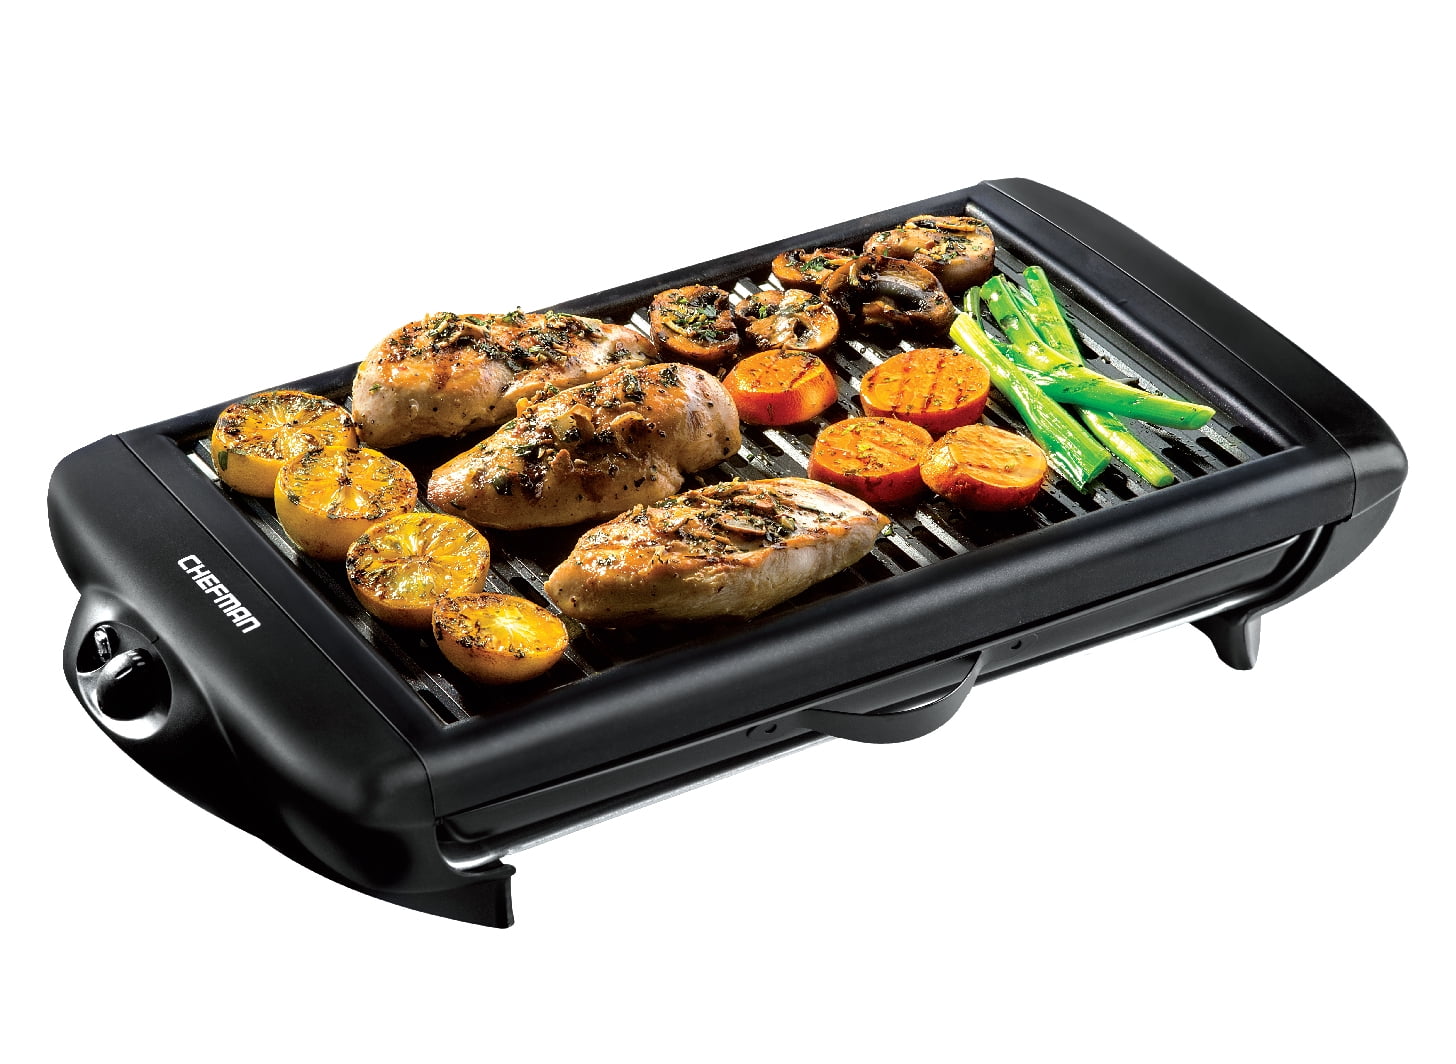 Chefman Electric Smokeless Indoor Grill with Non-Stick Coating, Black